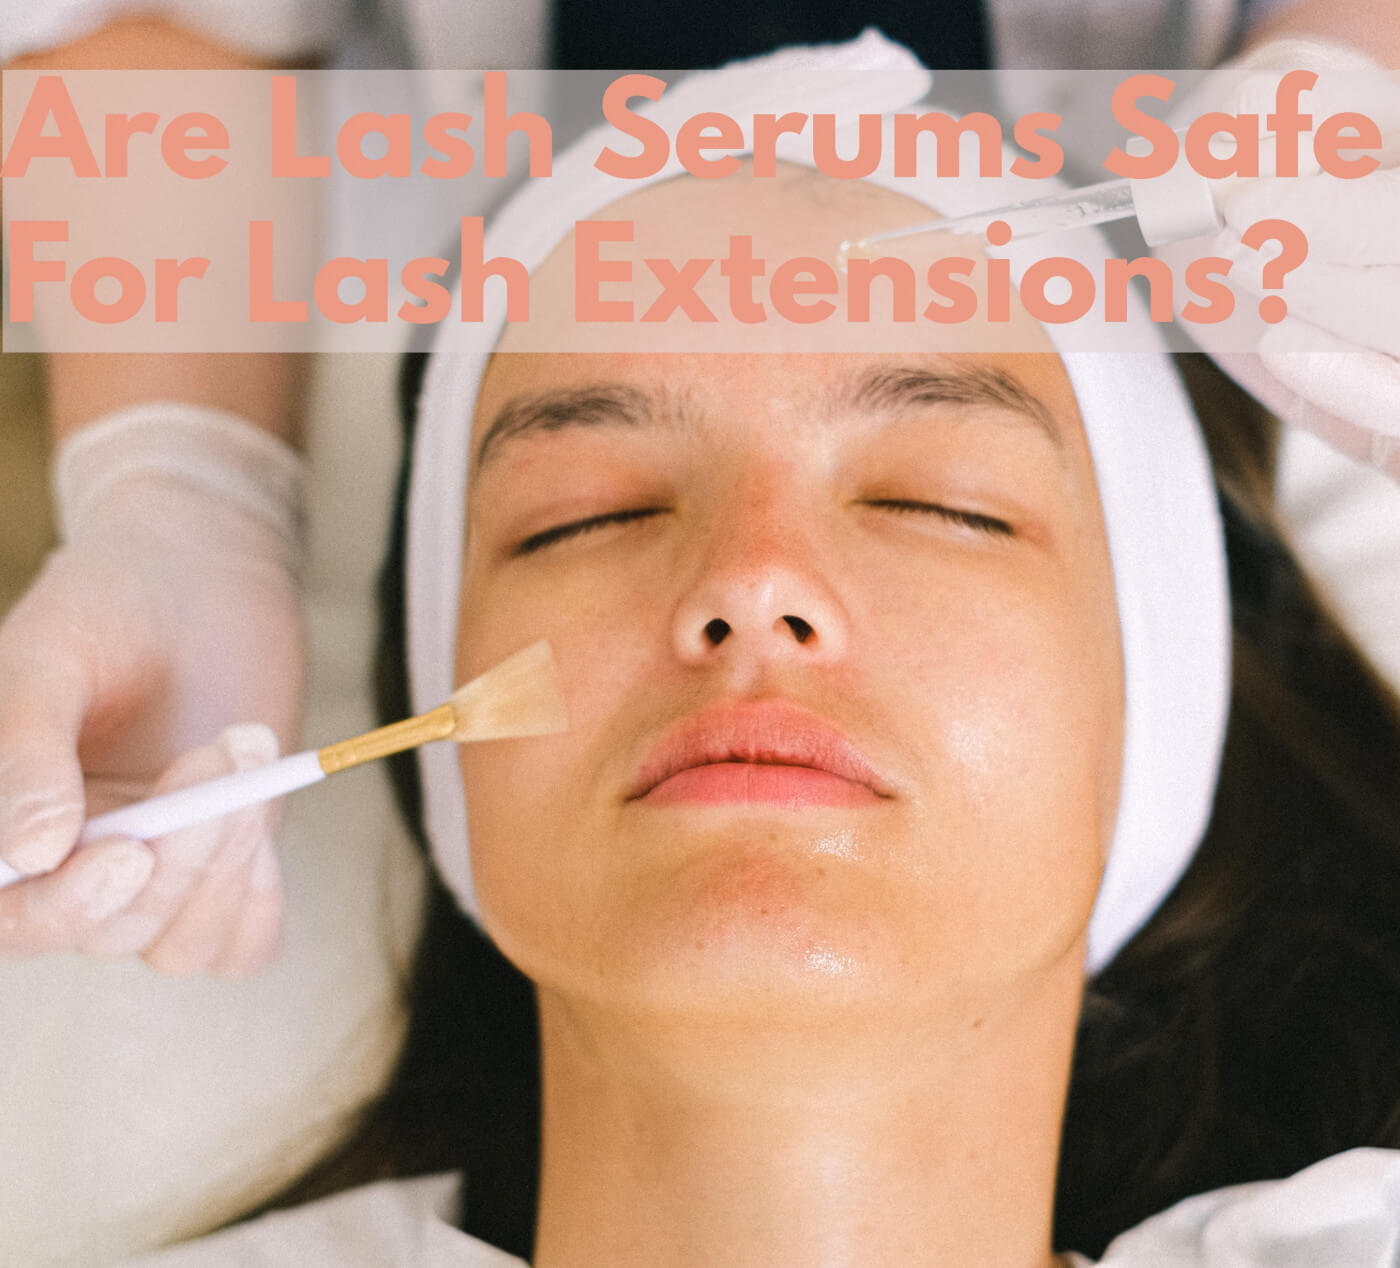 Are Lash Serums Safe For Lash Extensions?